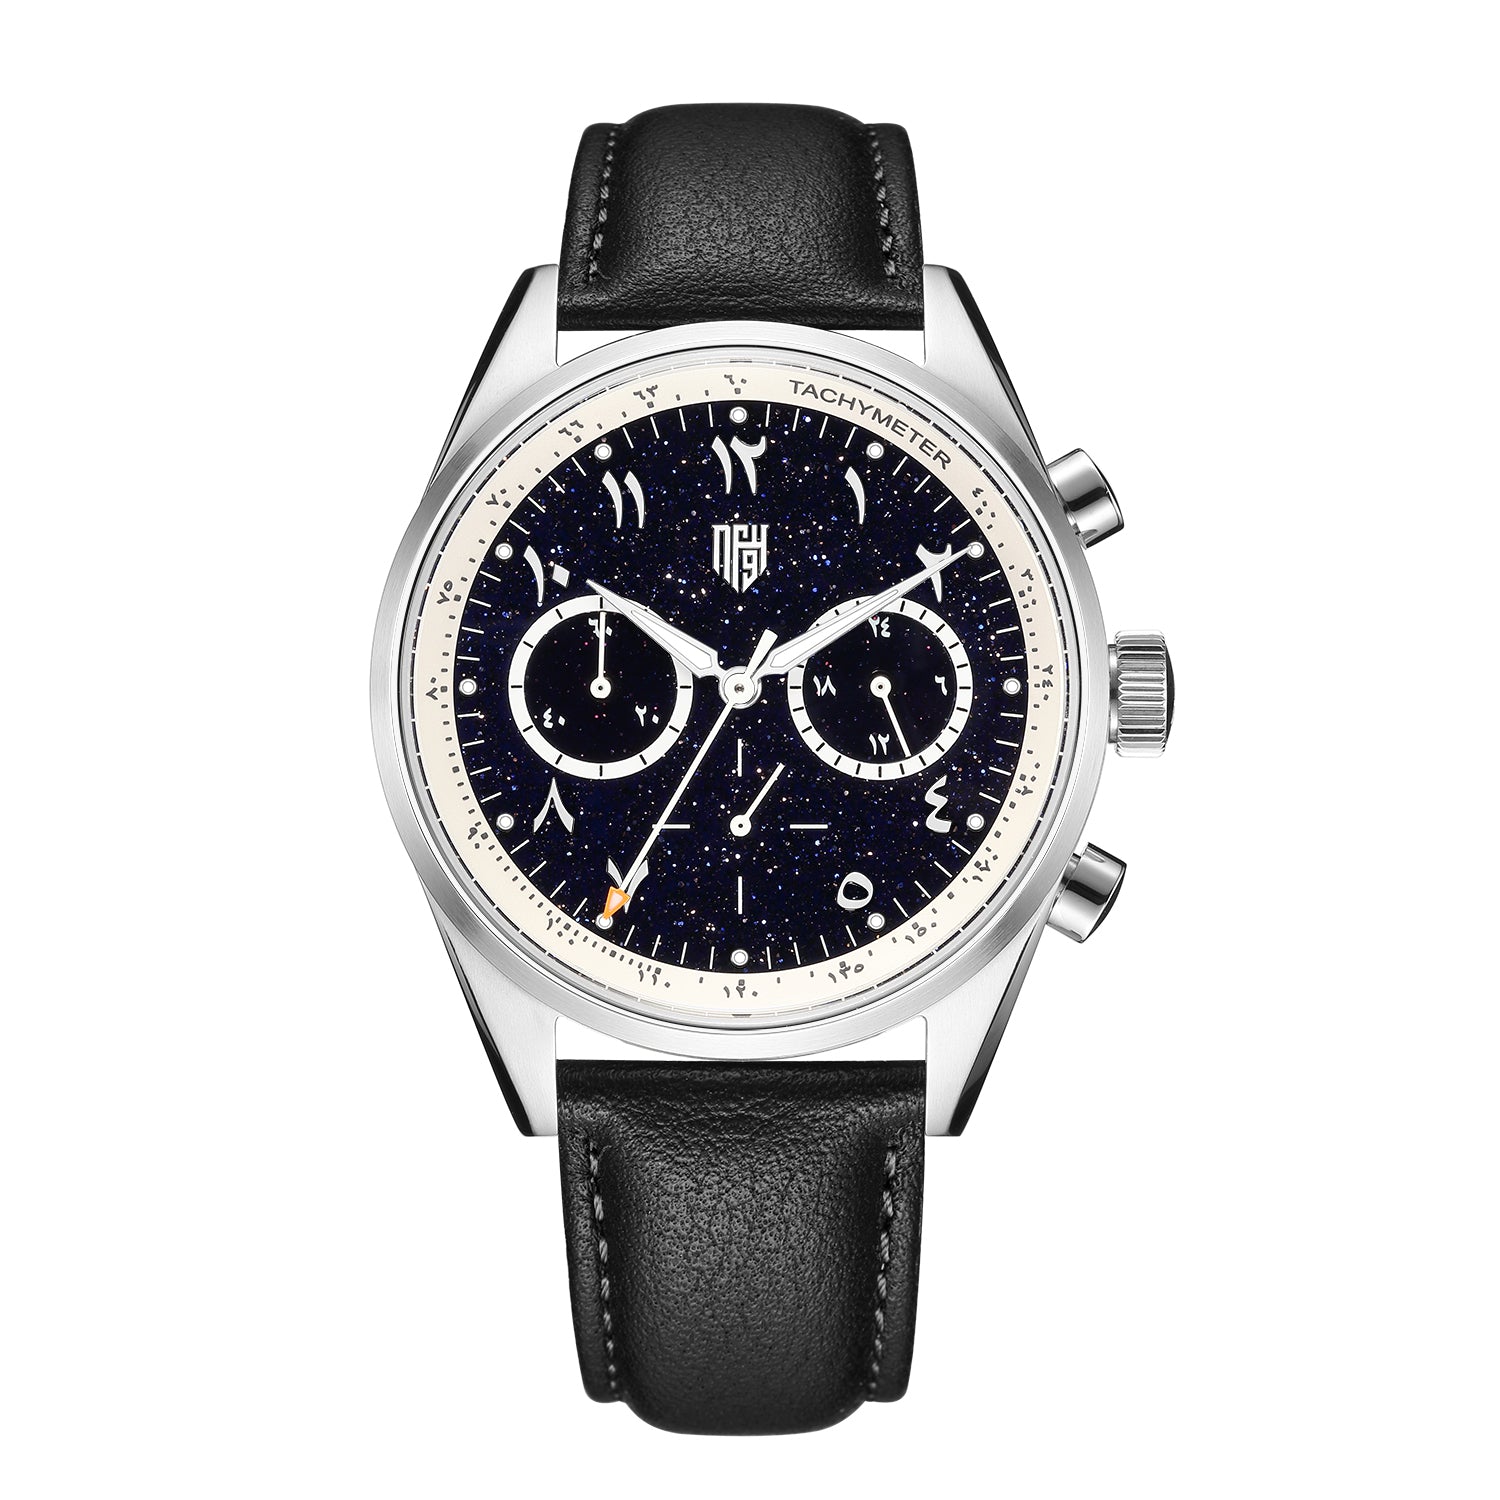 Culture Chronograph 2-Constellation dial – Four Nine Watches